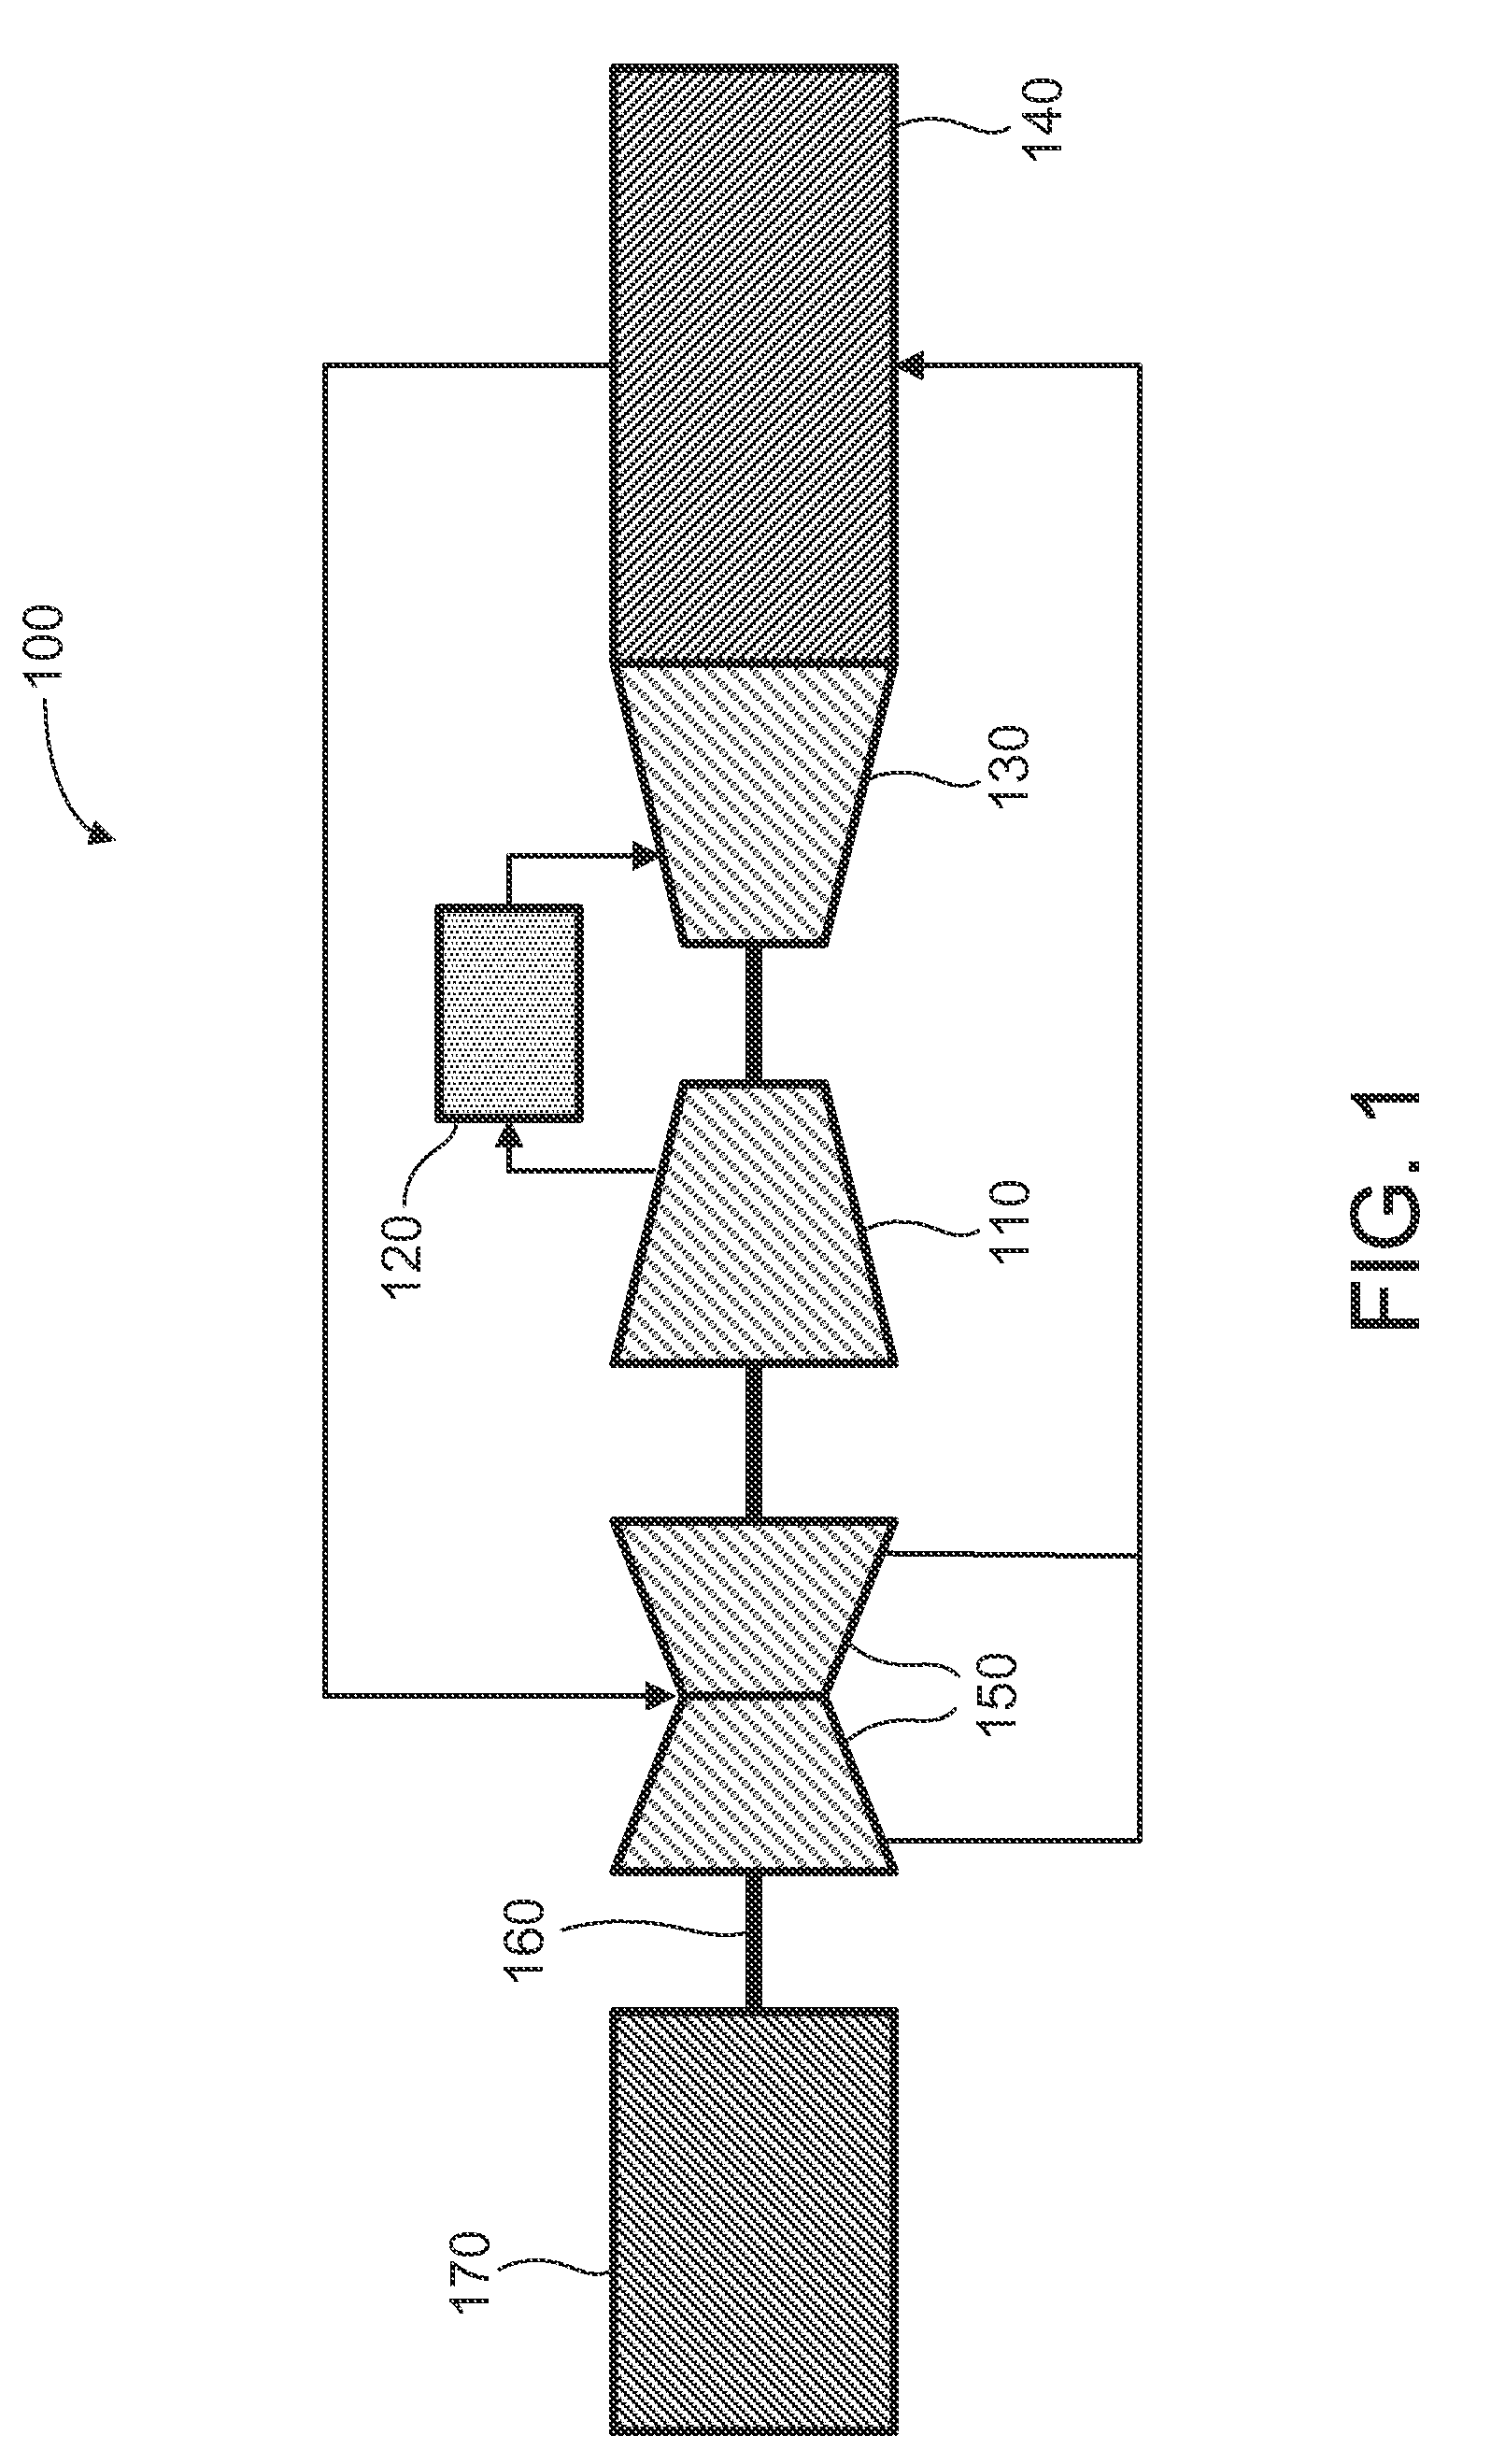 Heat pipe cooled turbine casing system for clearance management